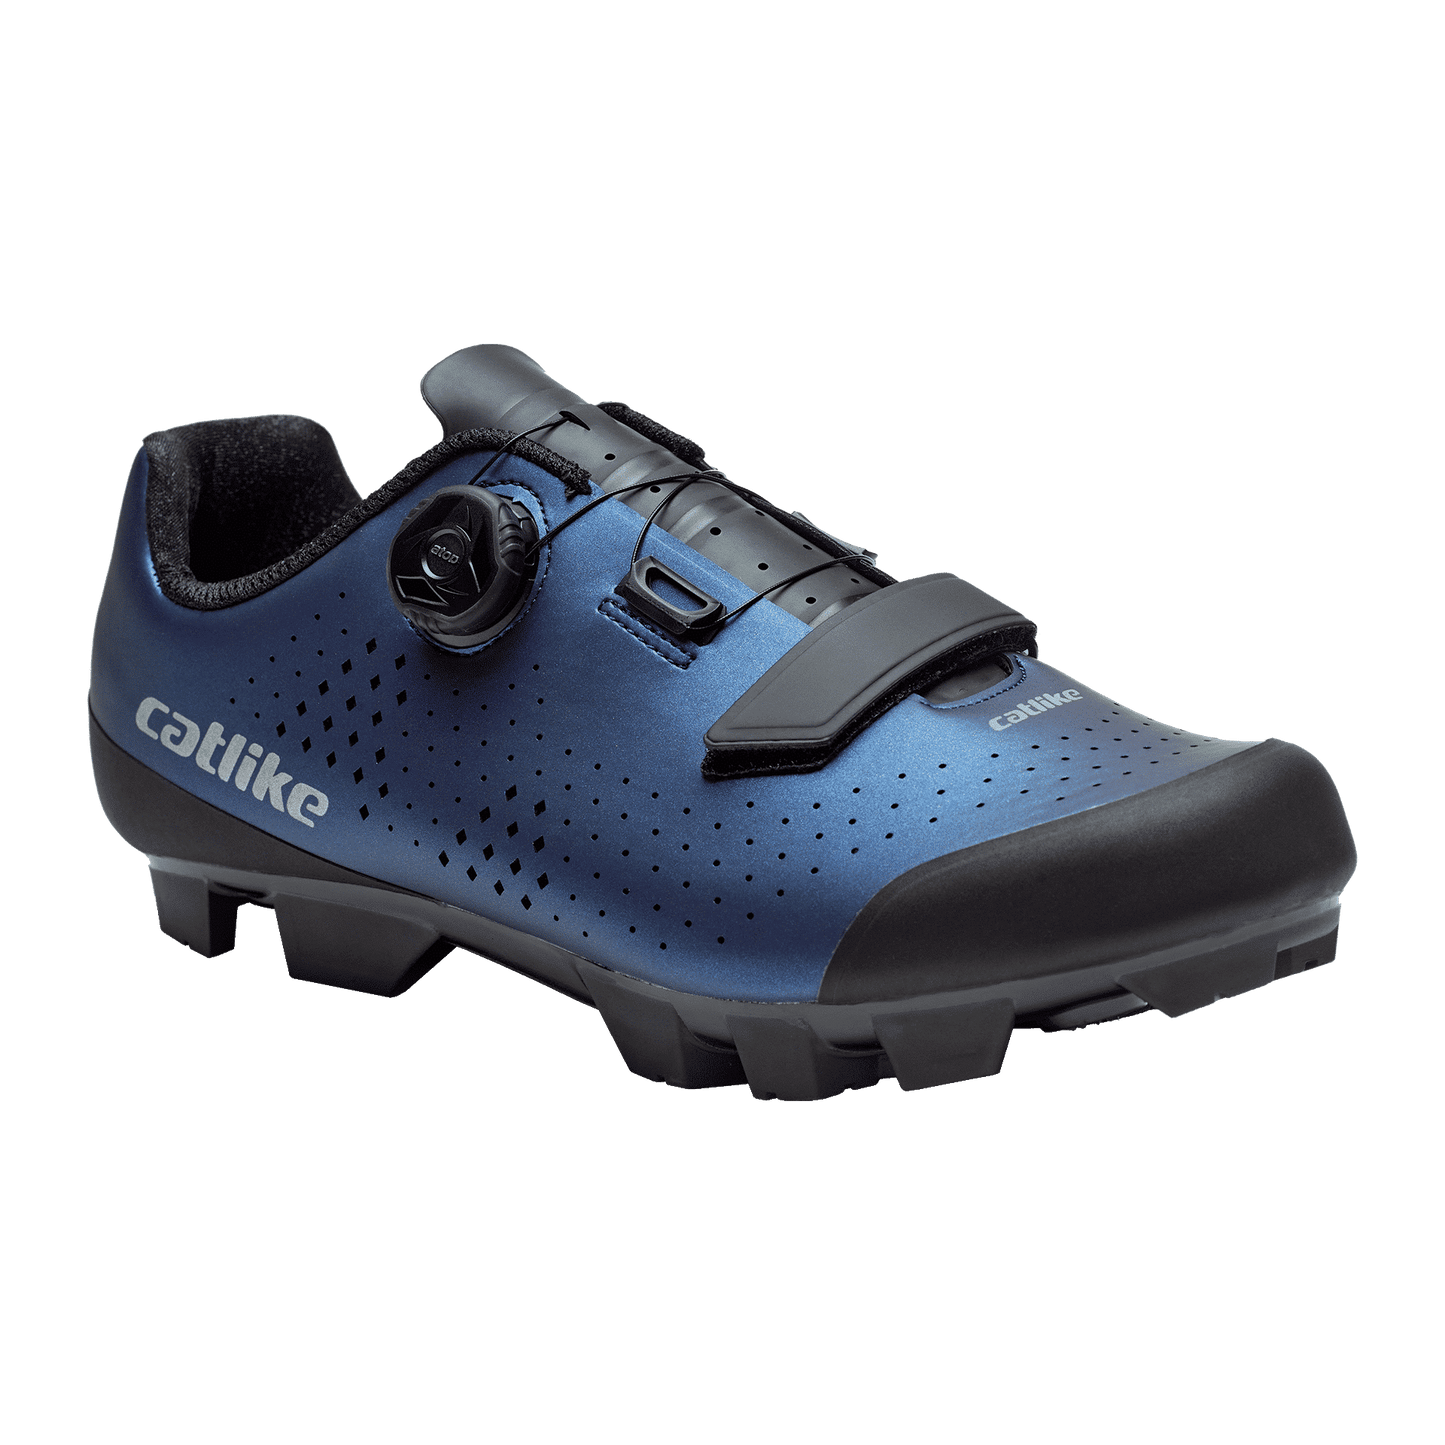 A product picture of the Catlike Kompact`O X MTB Shoes